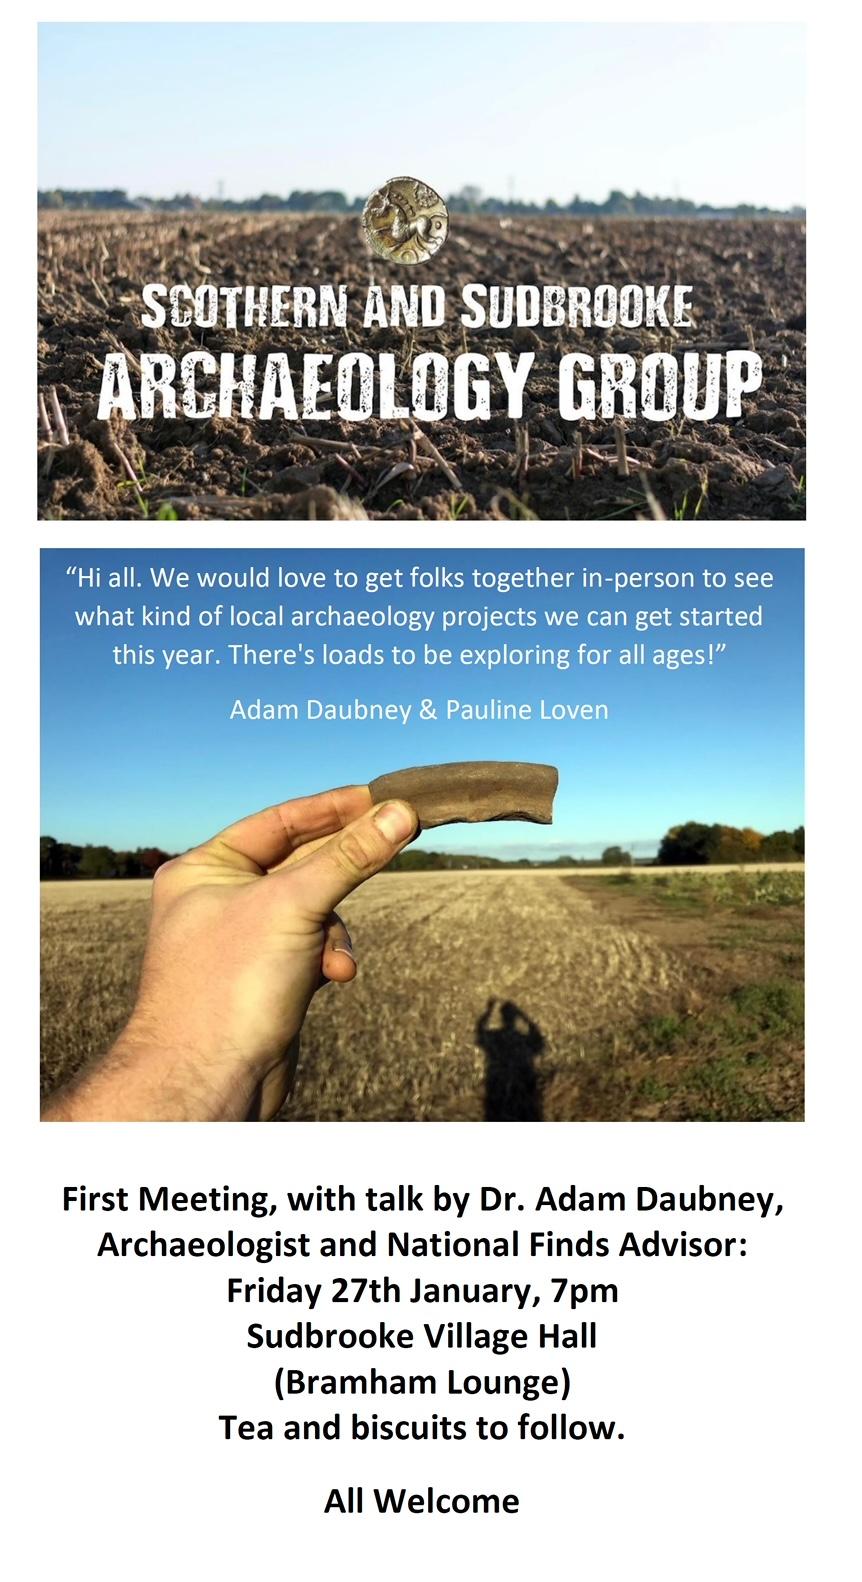 Scothern and sudbrooke archaeological group